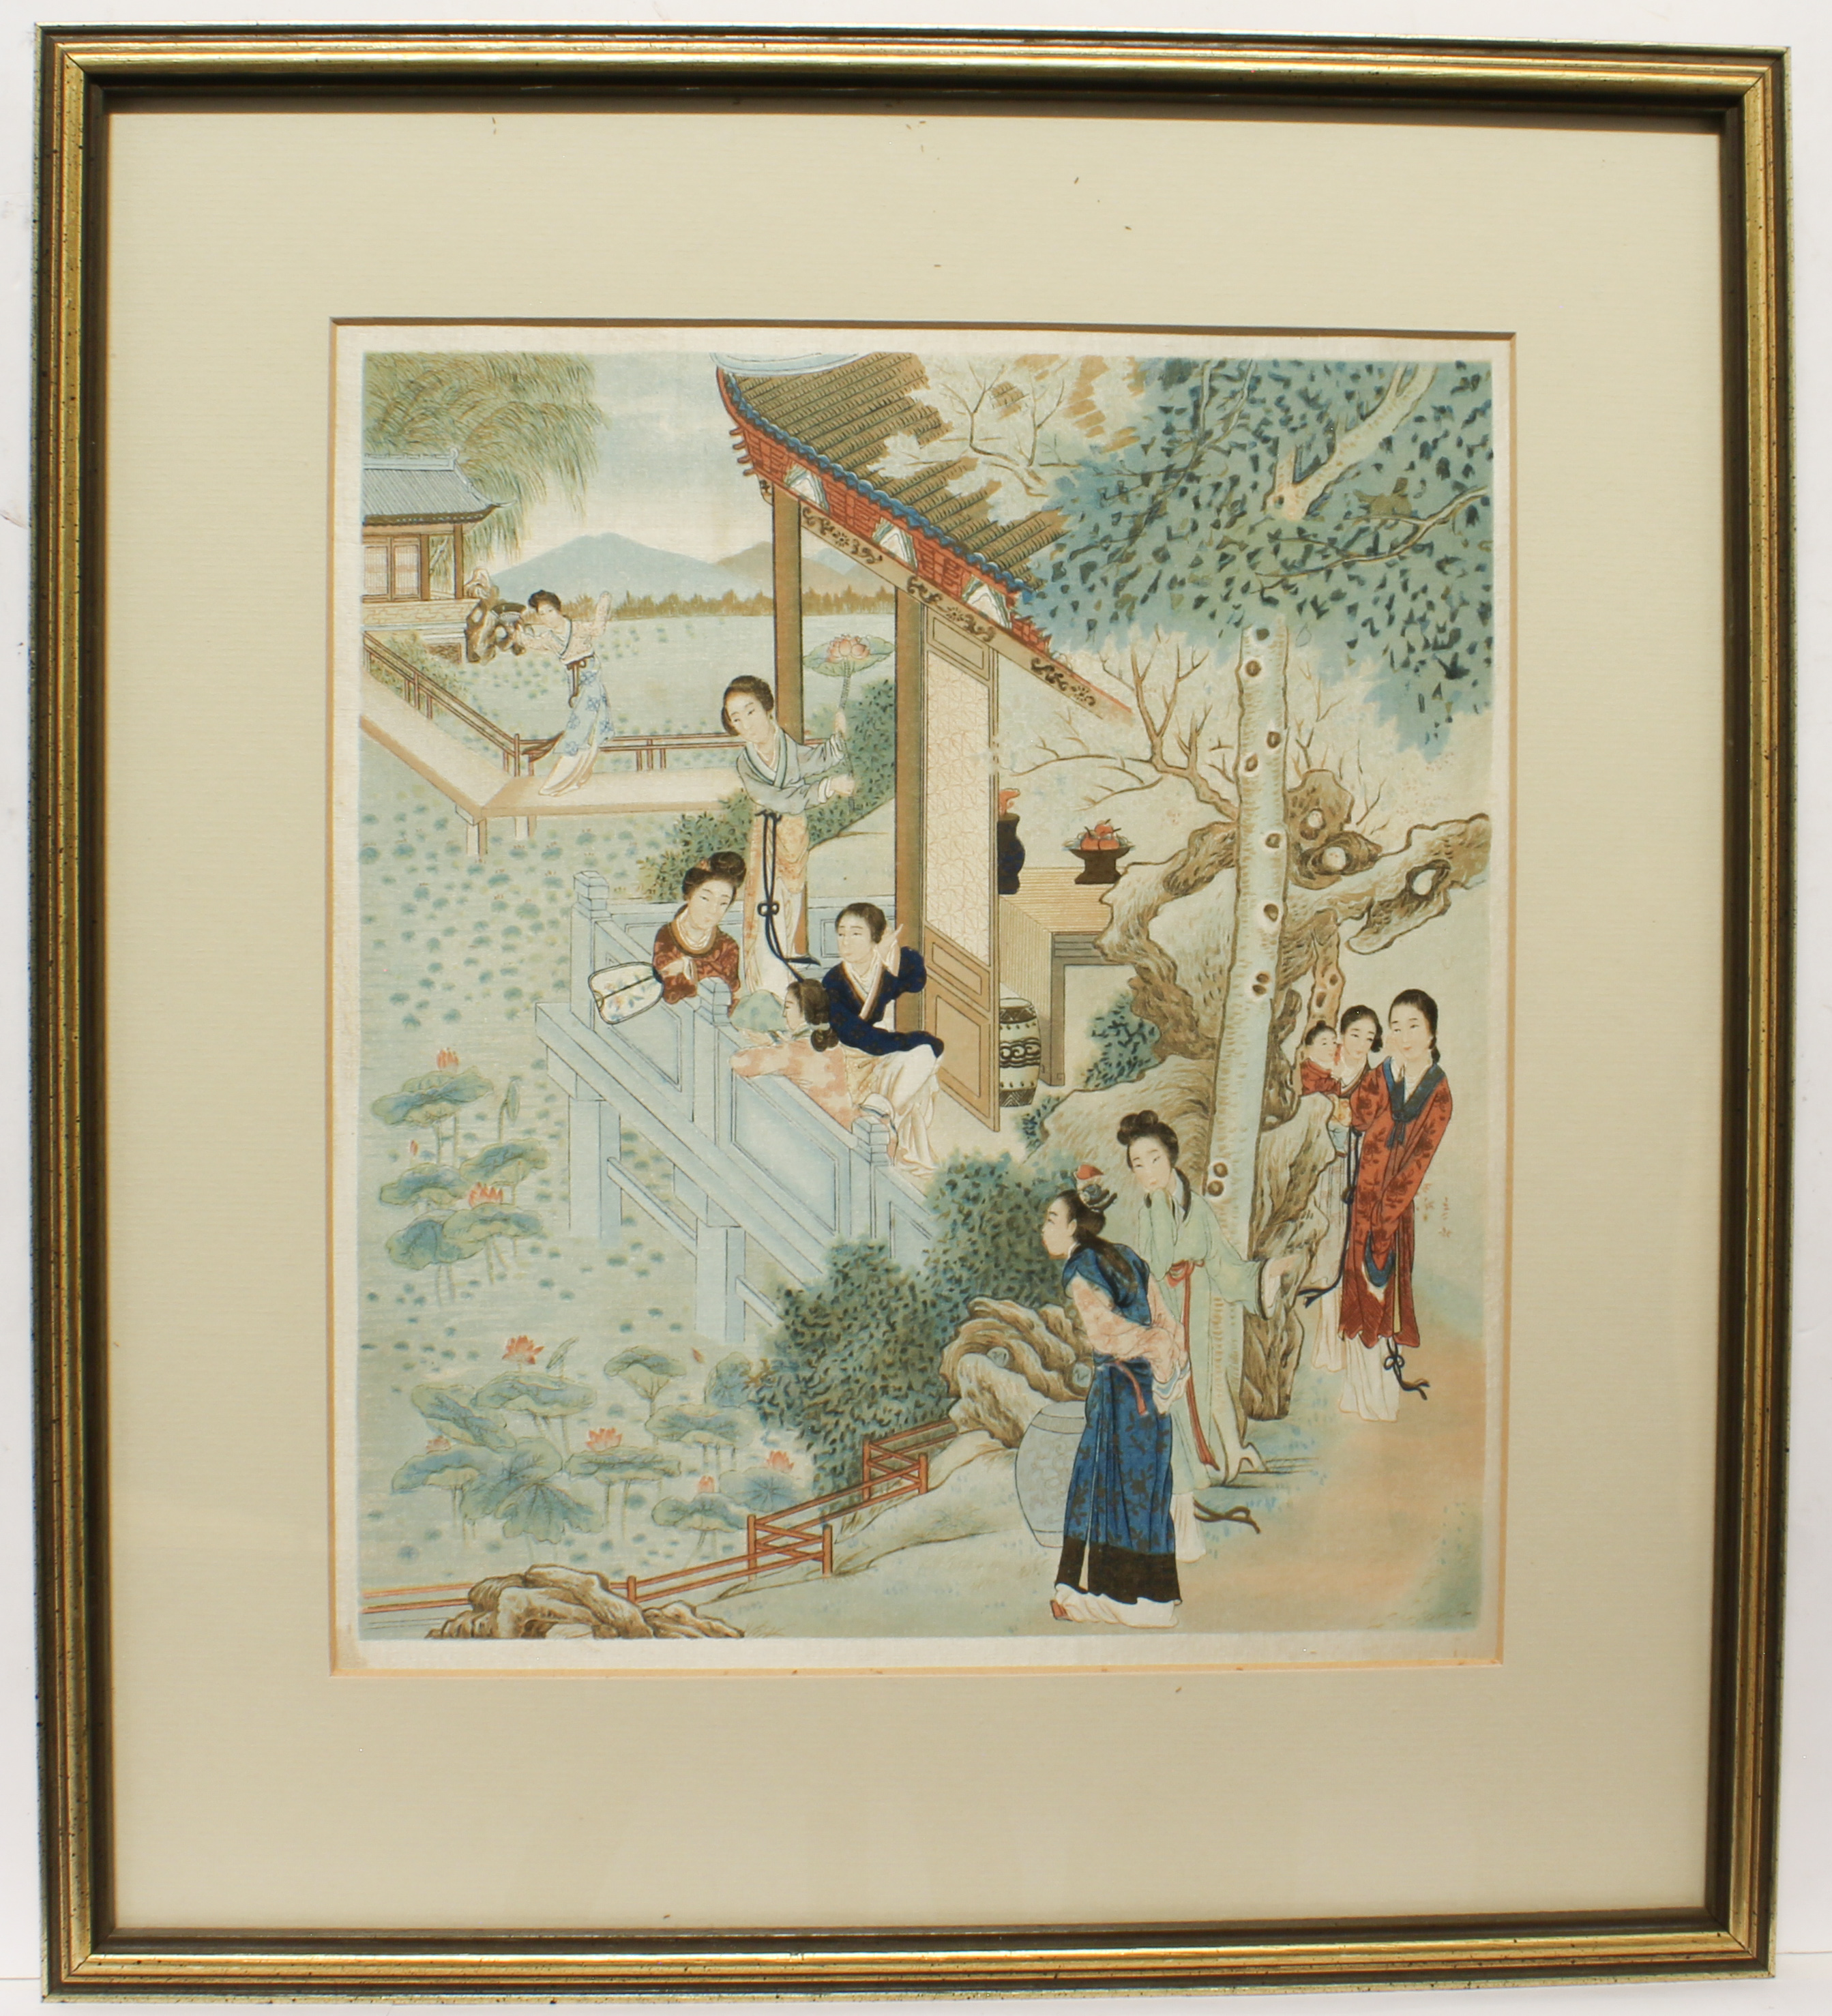 Three Japanese woodblock prints - 20th century after originals by Ando Hiroshige, framed and glazed, - Image 4 of 5